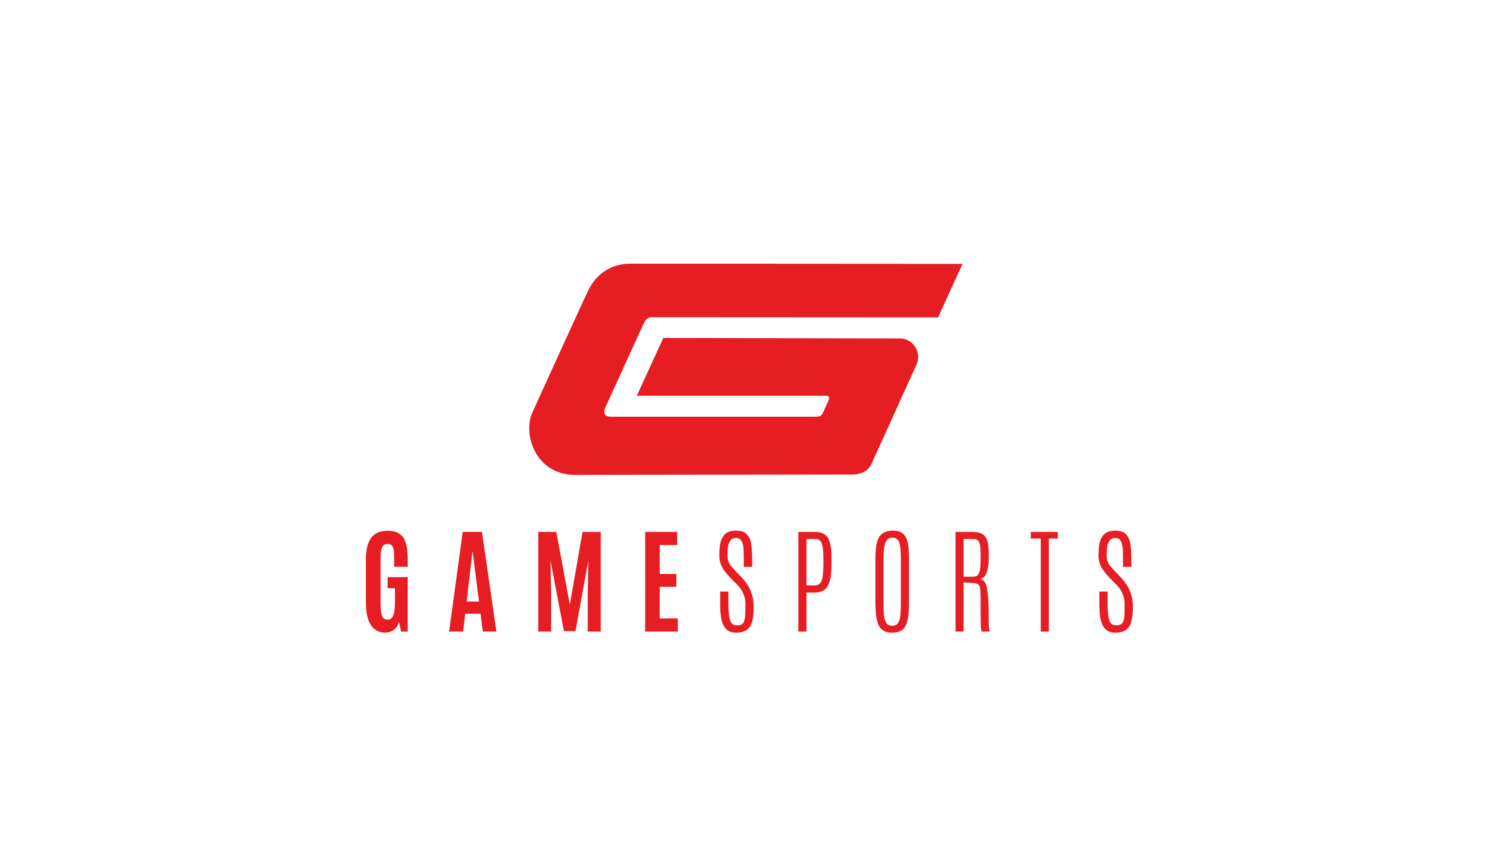 GAME SPORTS